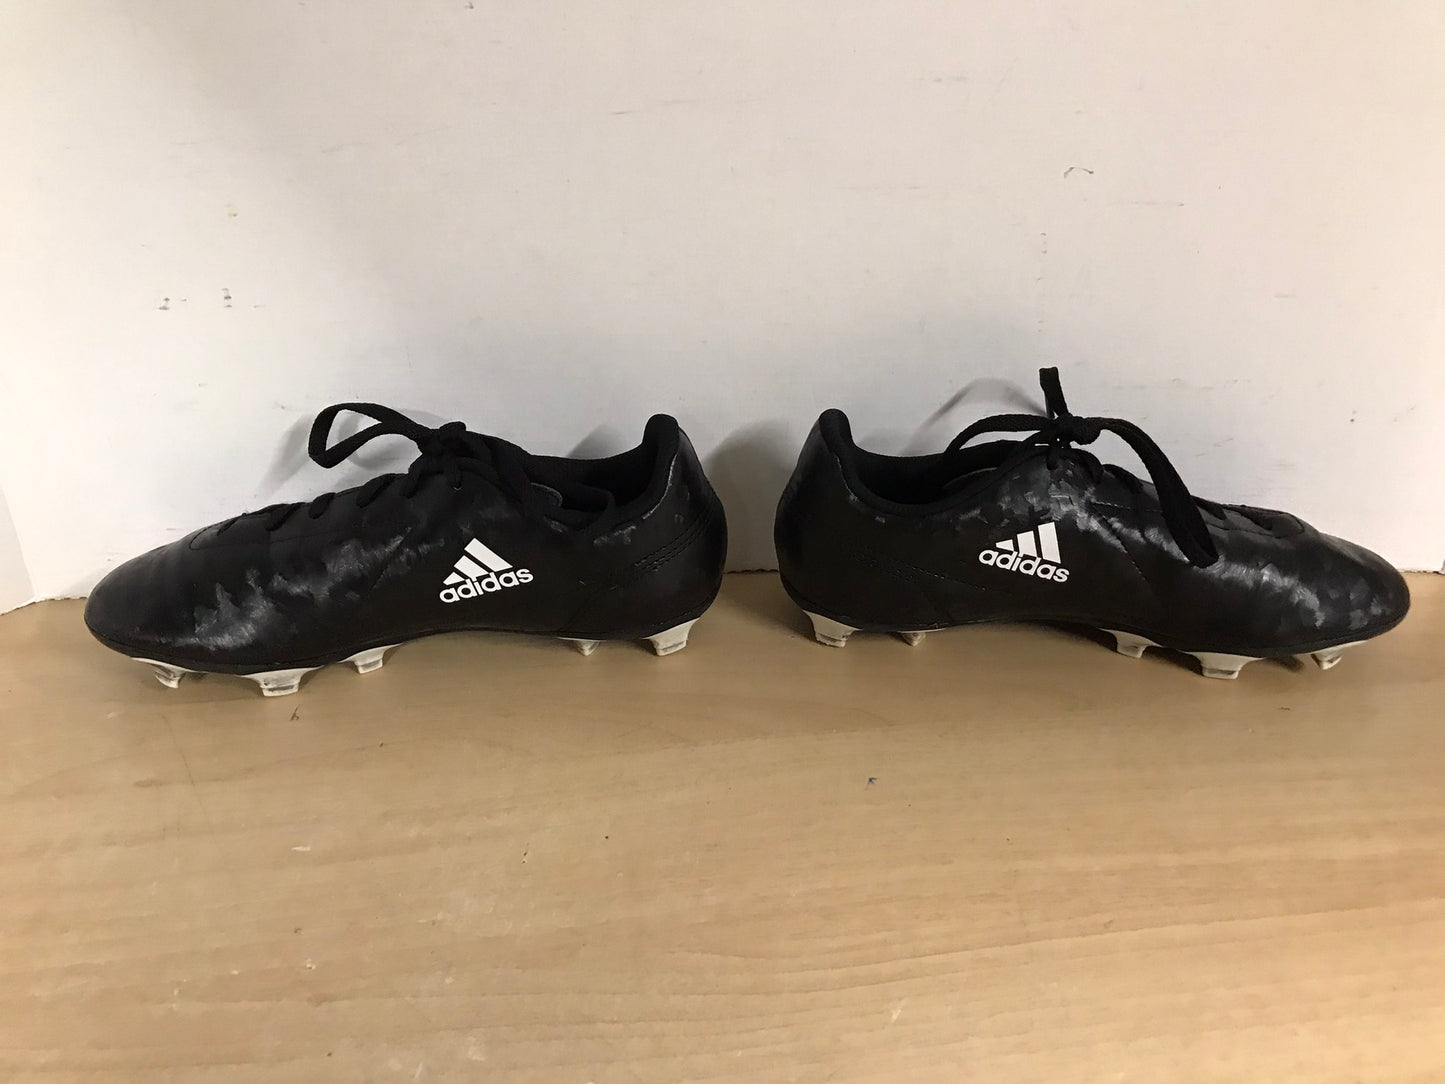 Soccer Shoes Cleats Child Size 4.5 Adidas Black White Excellent